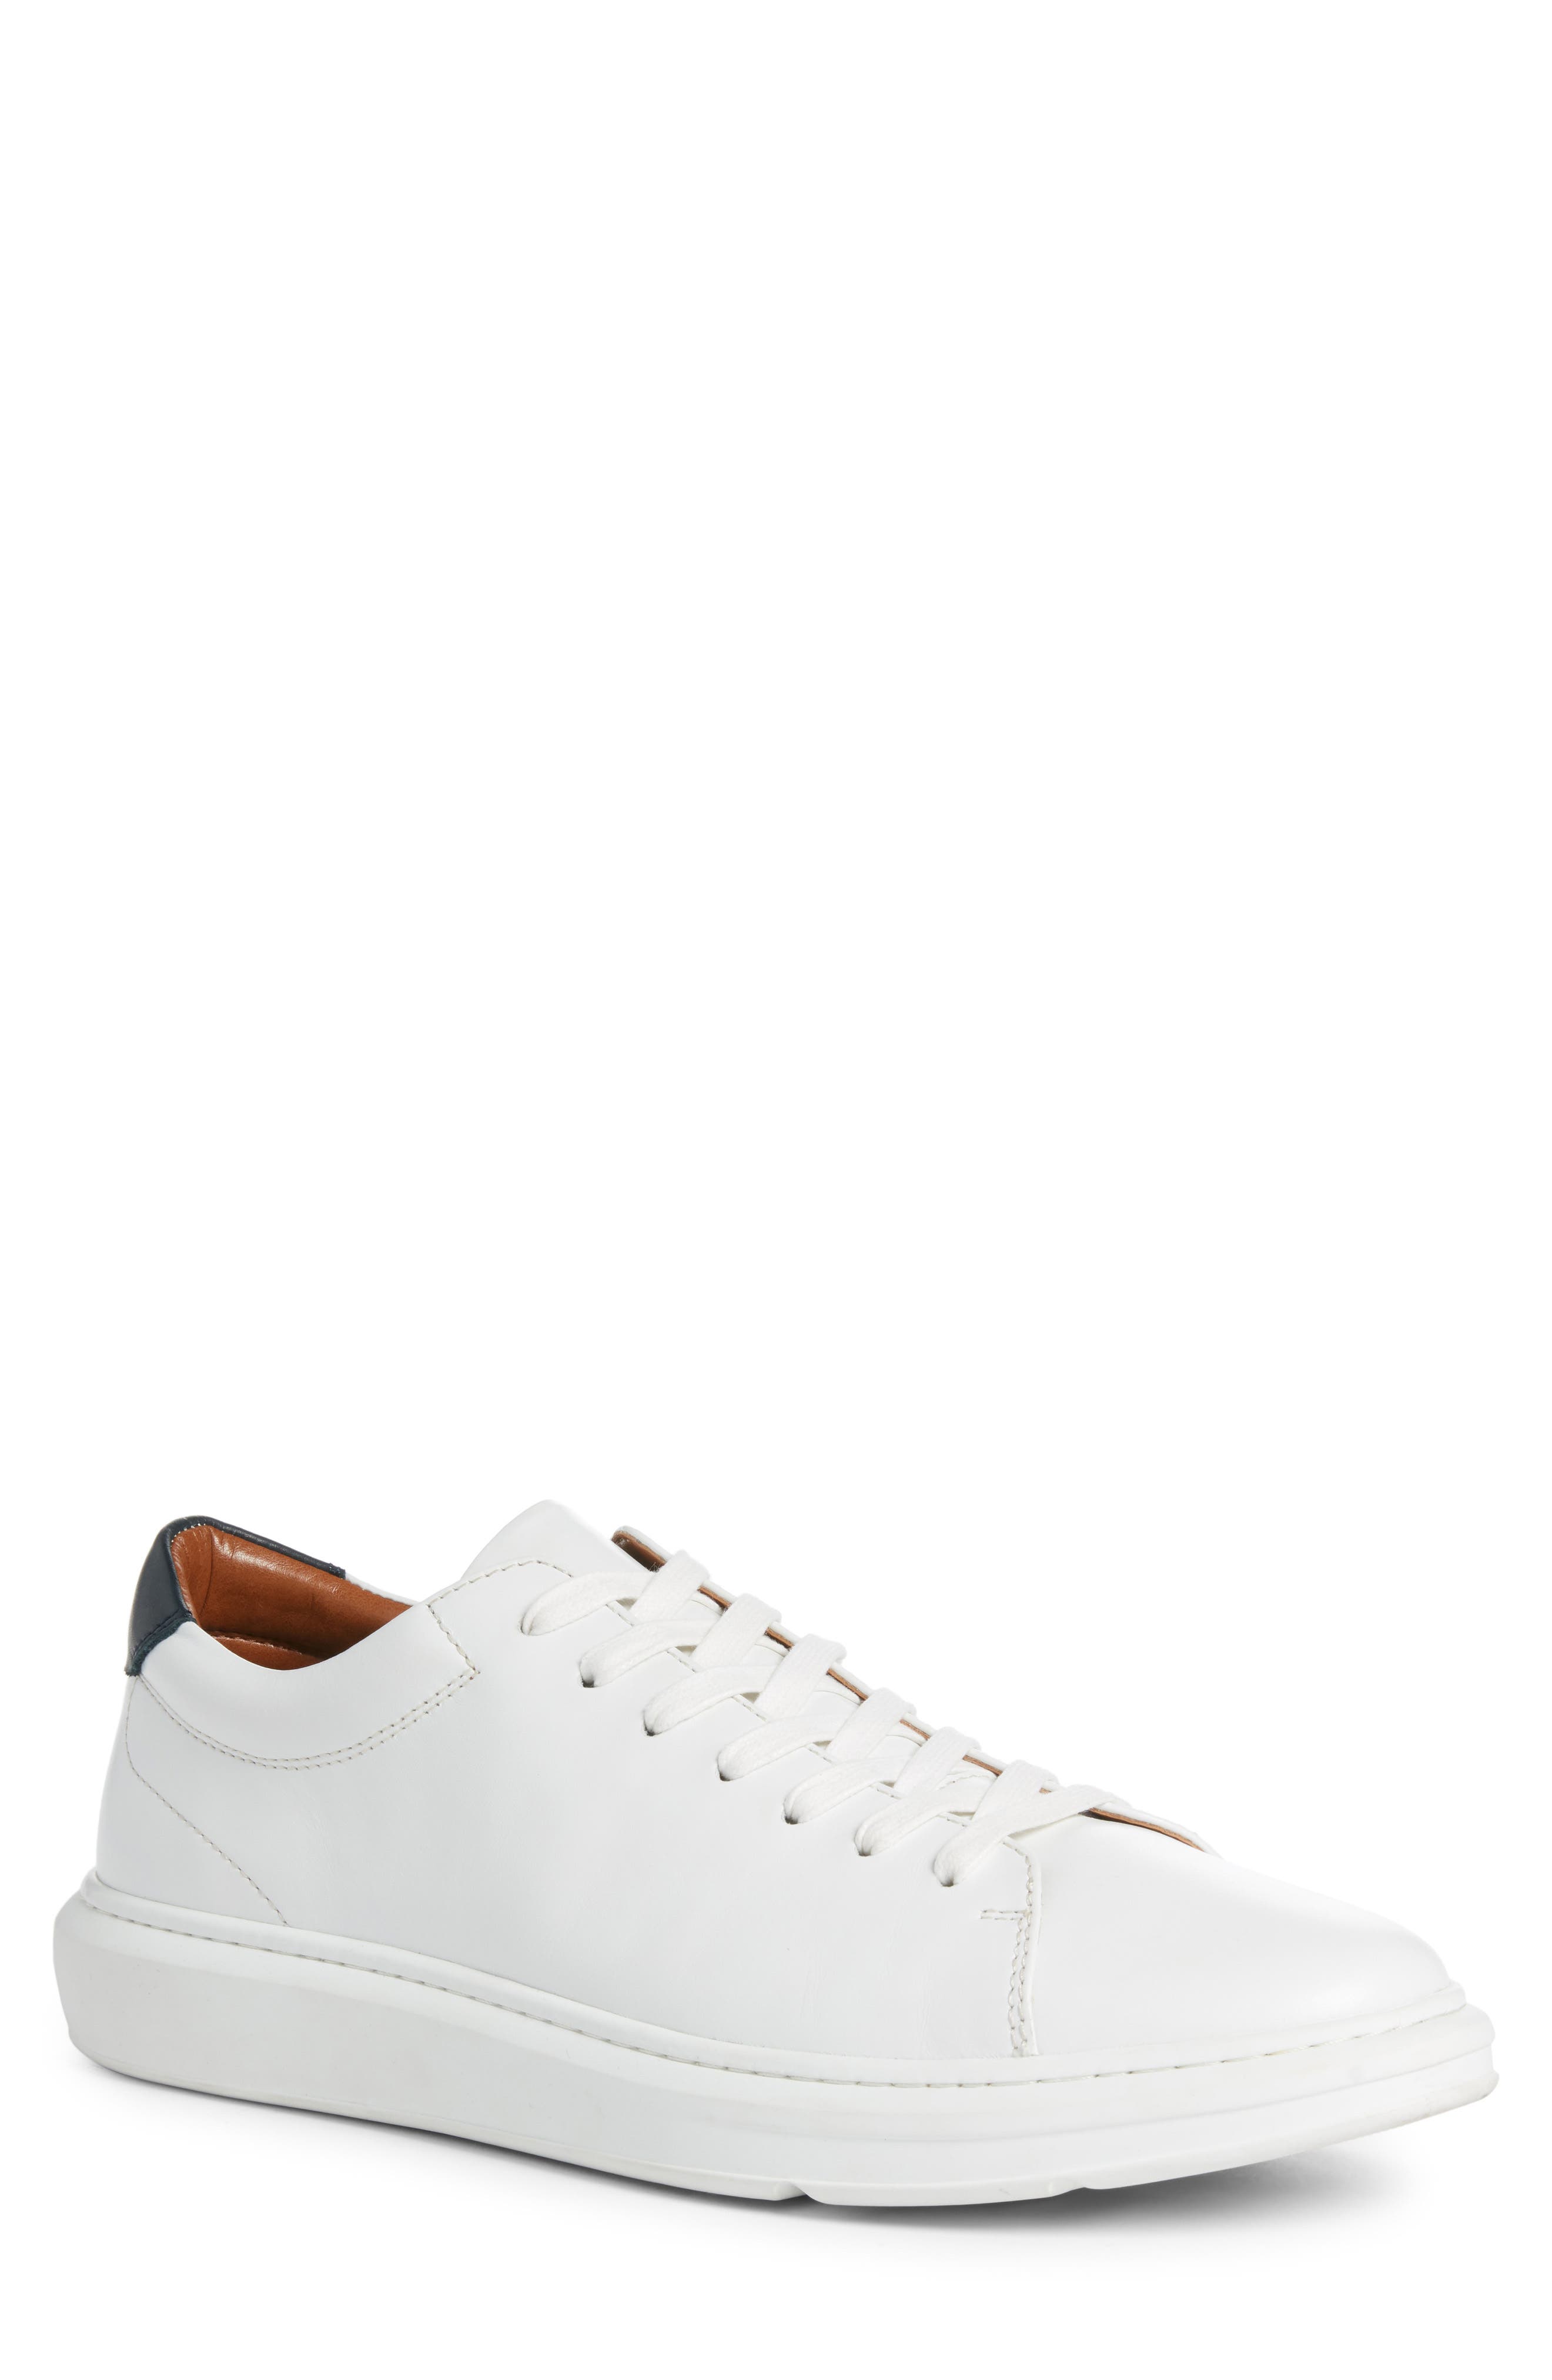 white shoes nordstrom